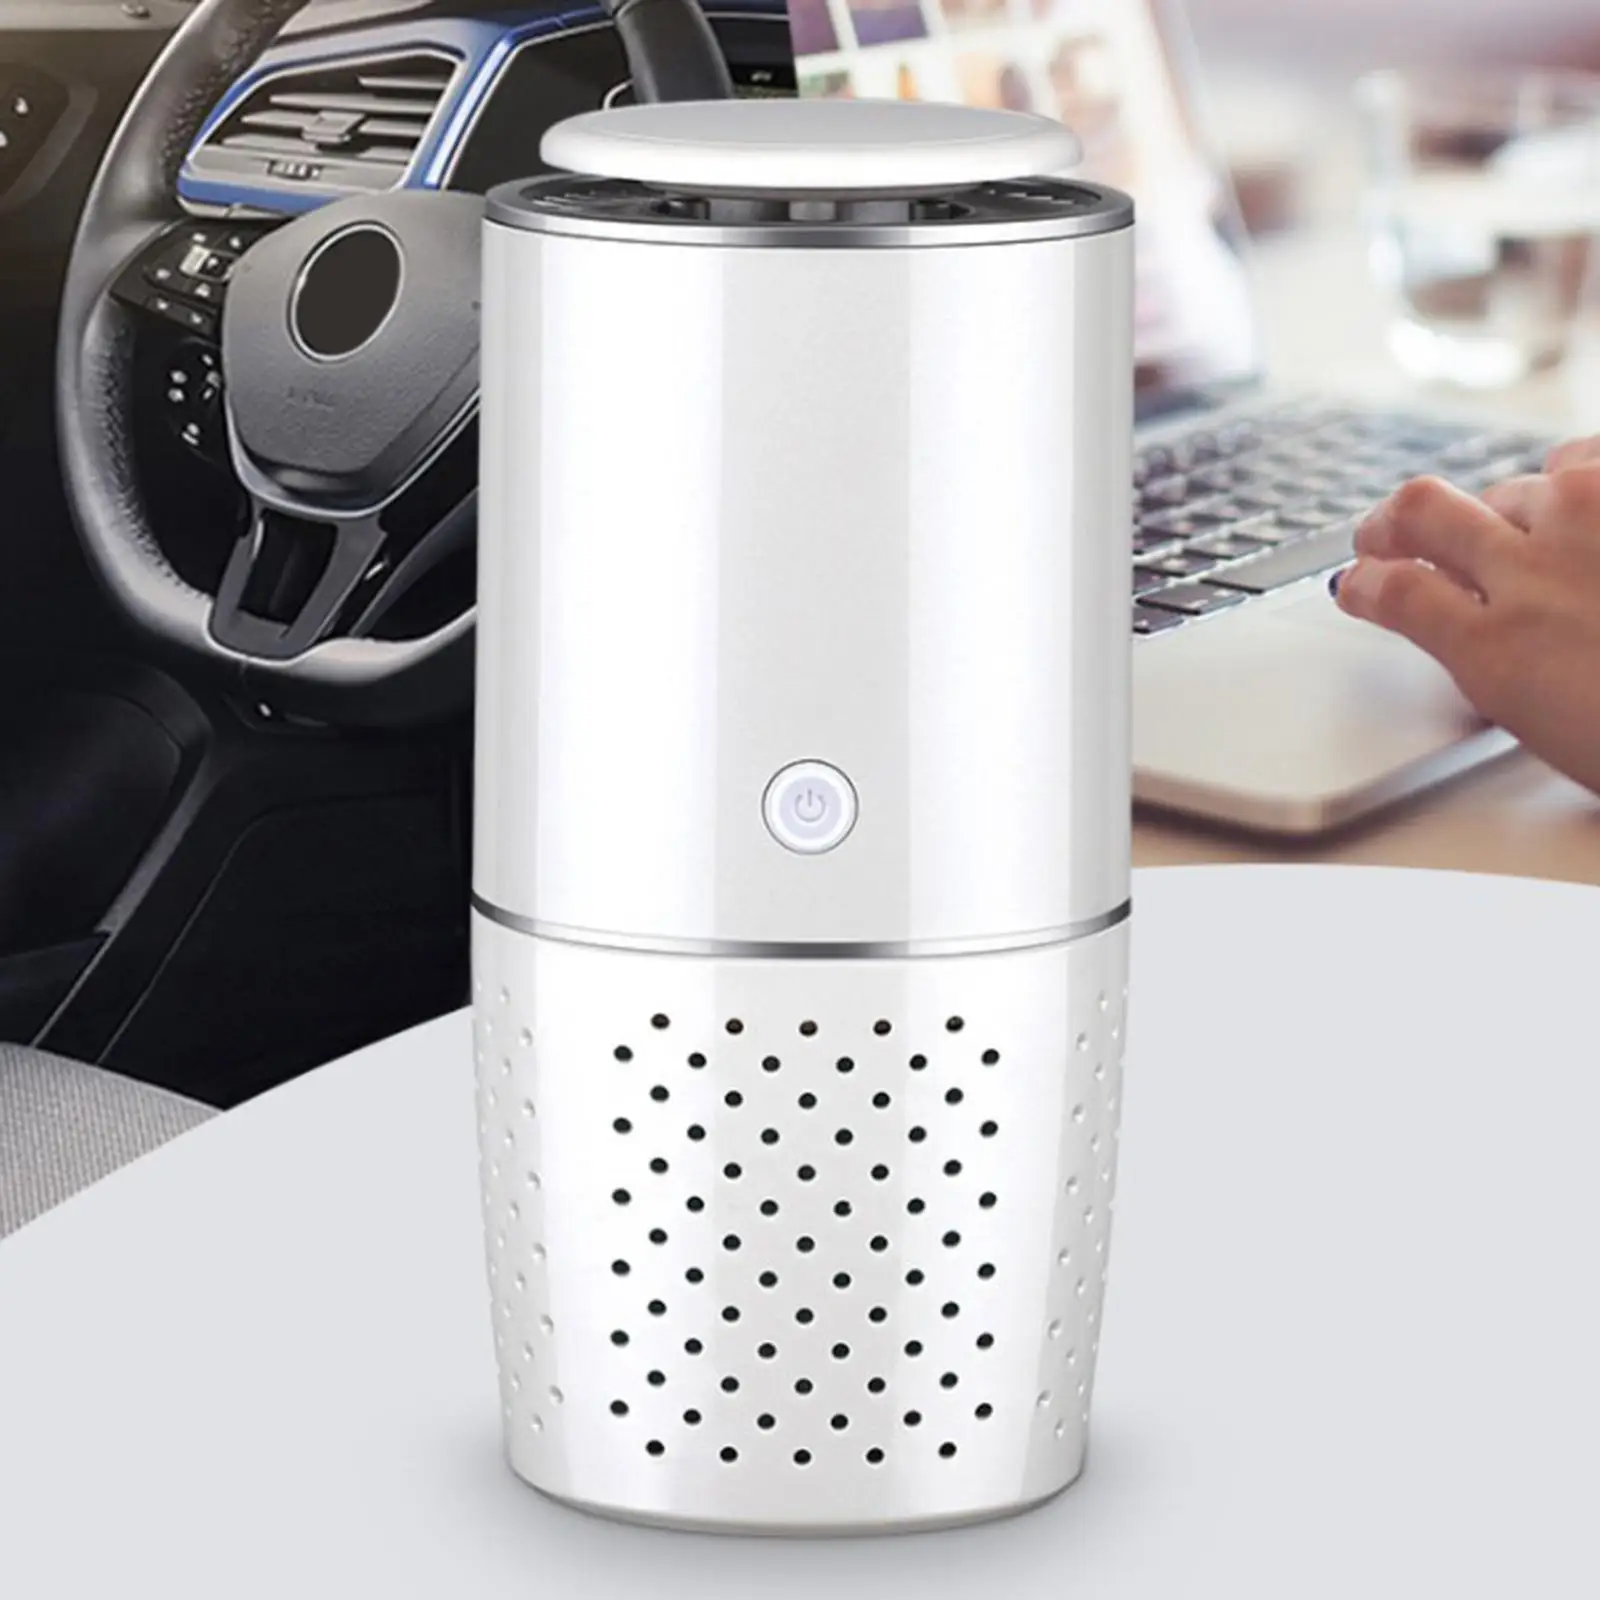 Car  Filter, Portable USB Charger  for Car, Office, Bedroom, Effectively to Remove Dust, Smoke Smell, Pet and Food Odors